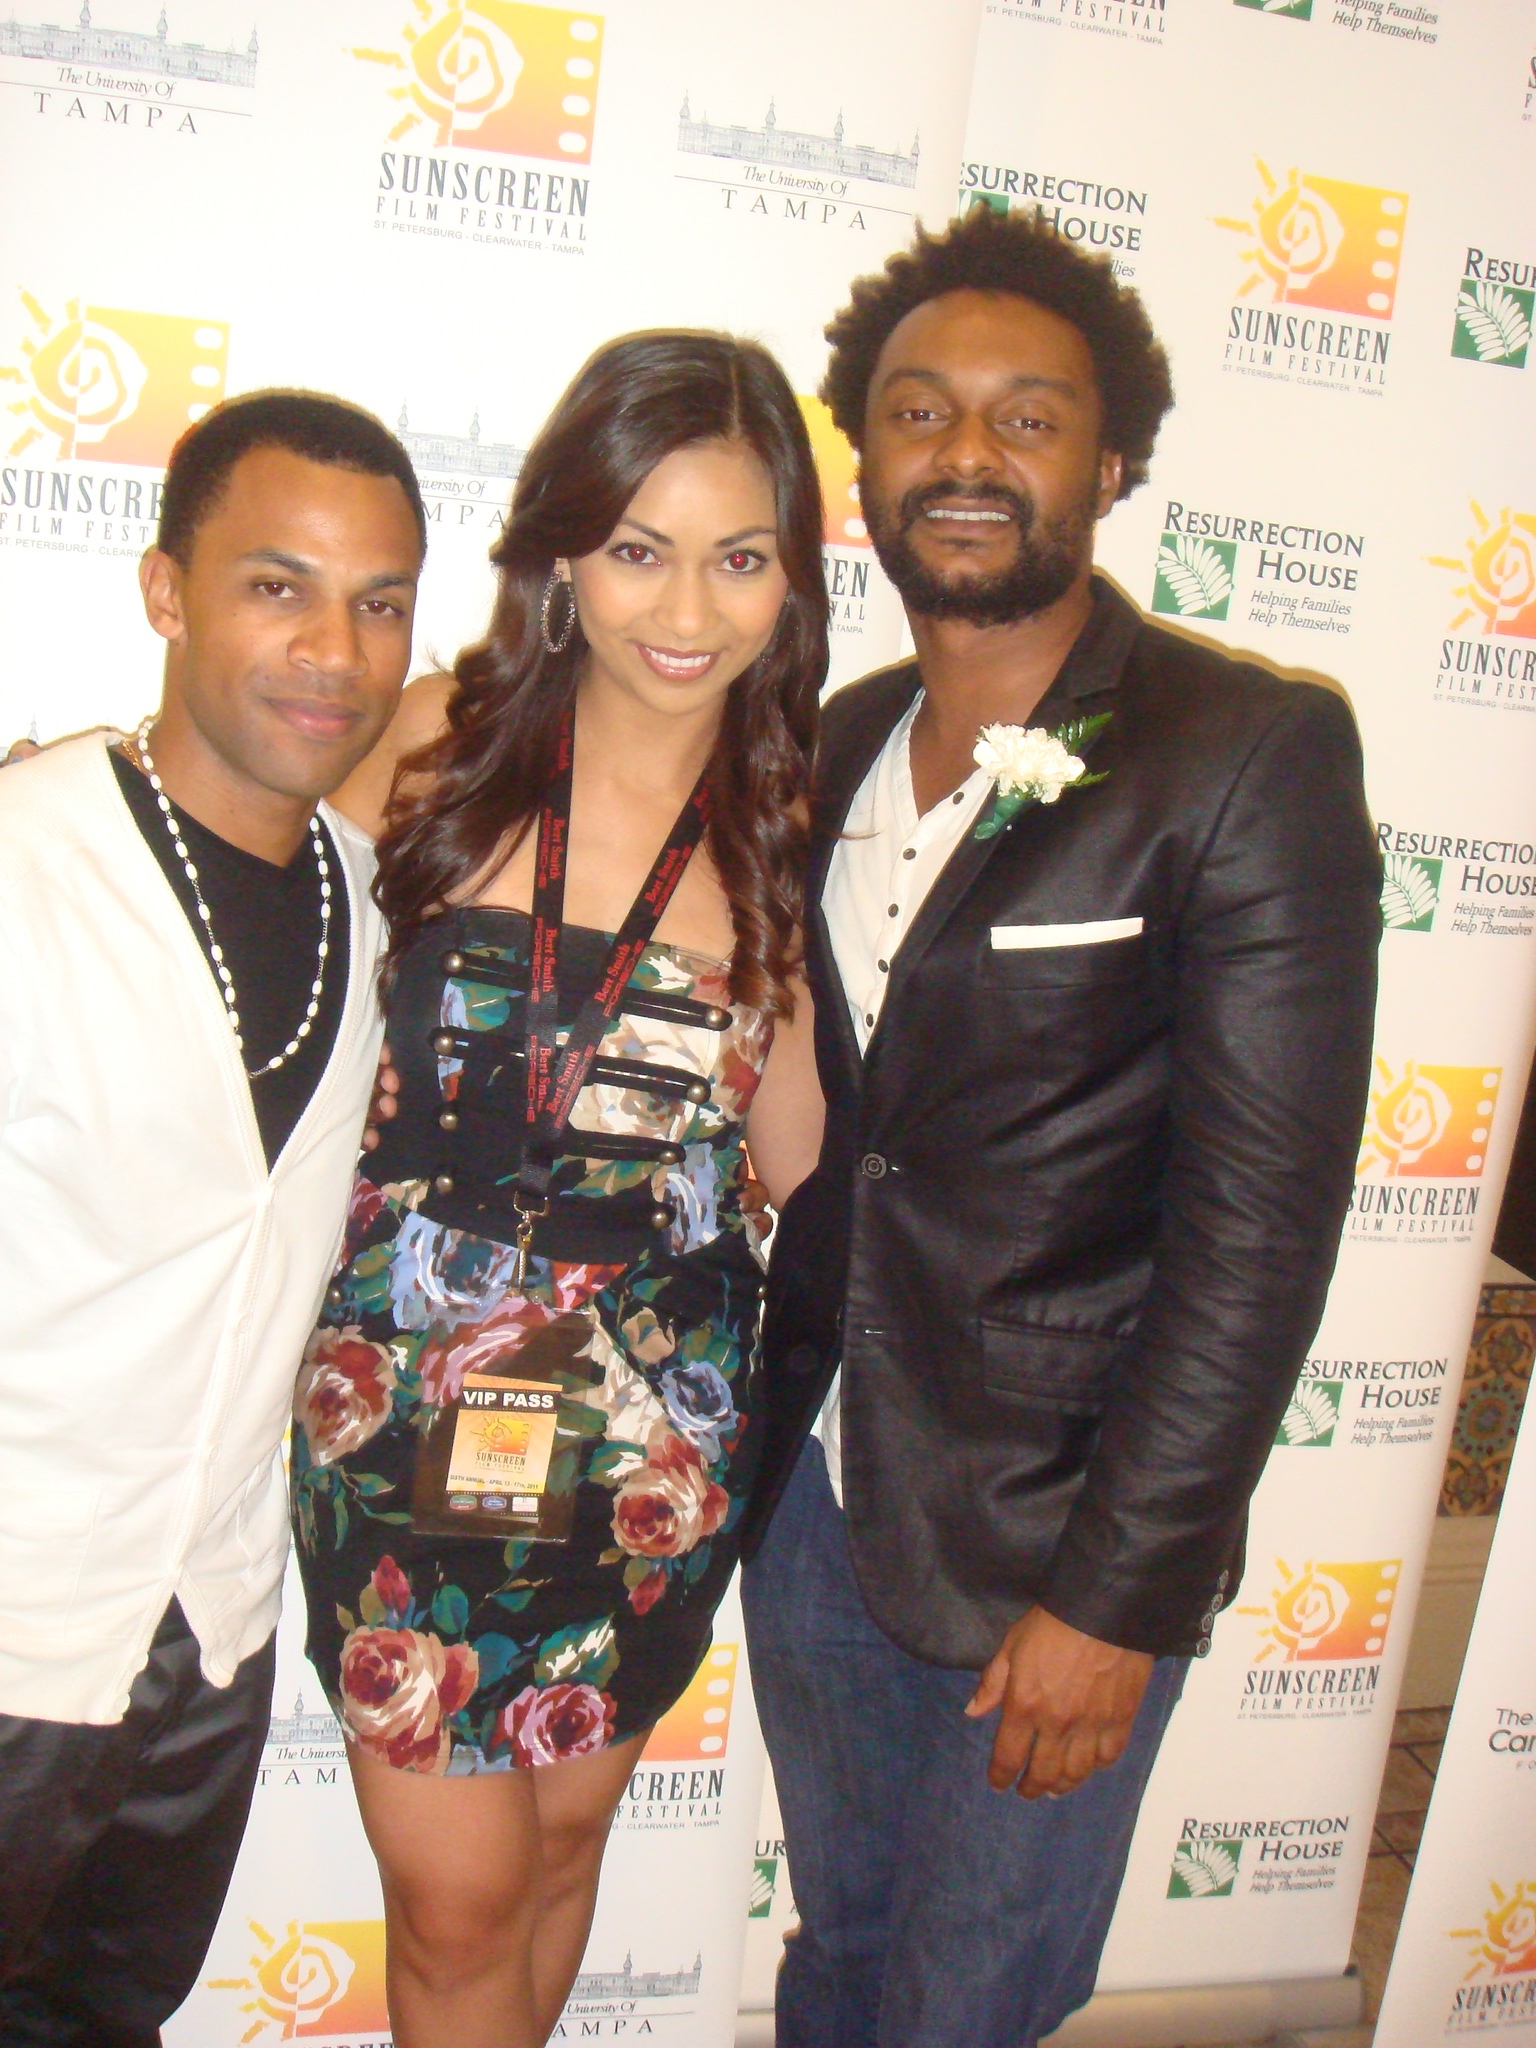 Mattox Gardner, Arias Stanley, and Jeph Cange at Sunscreen Film Festival